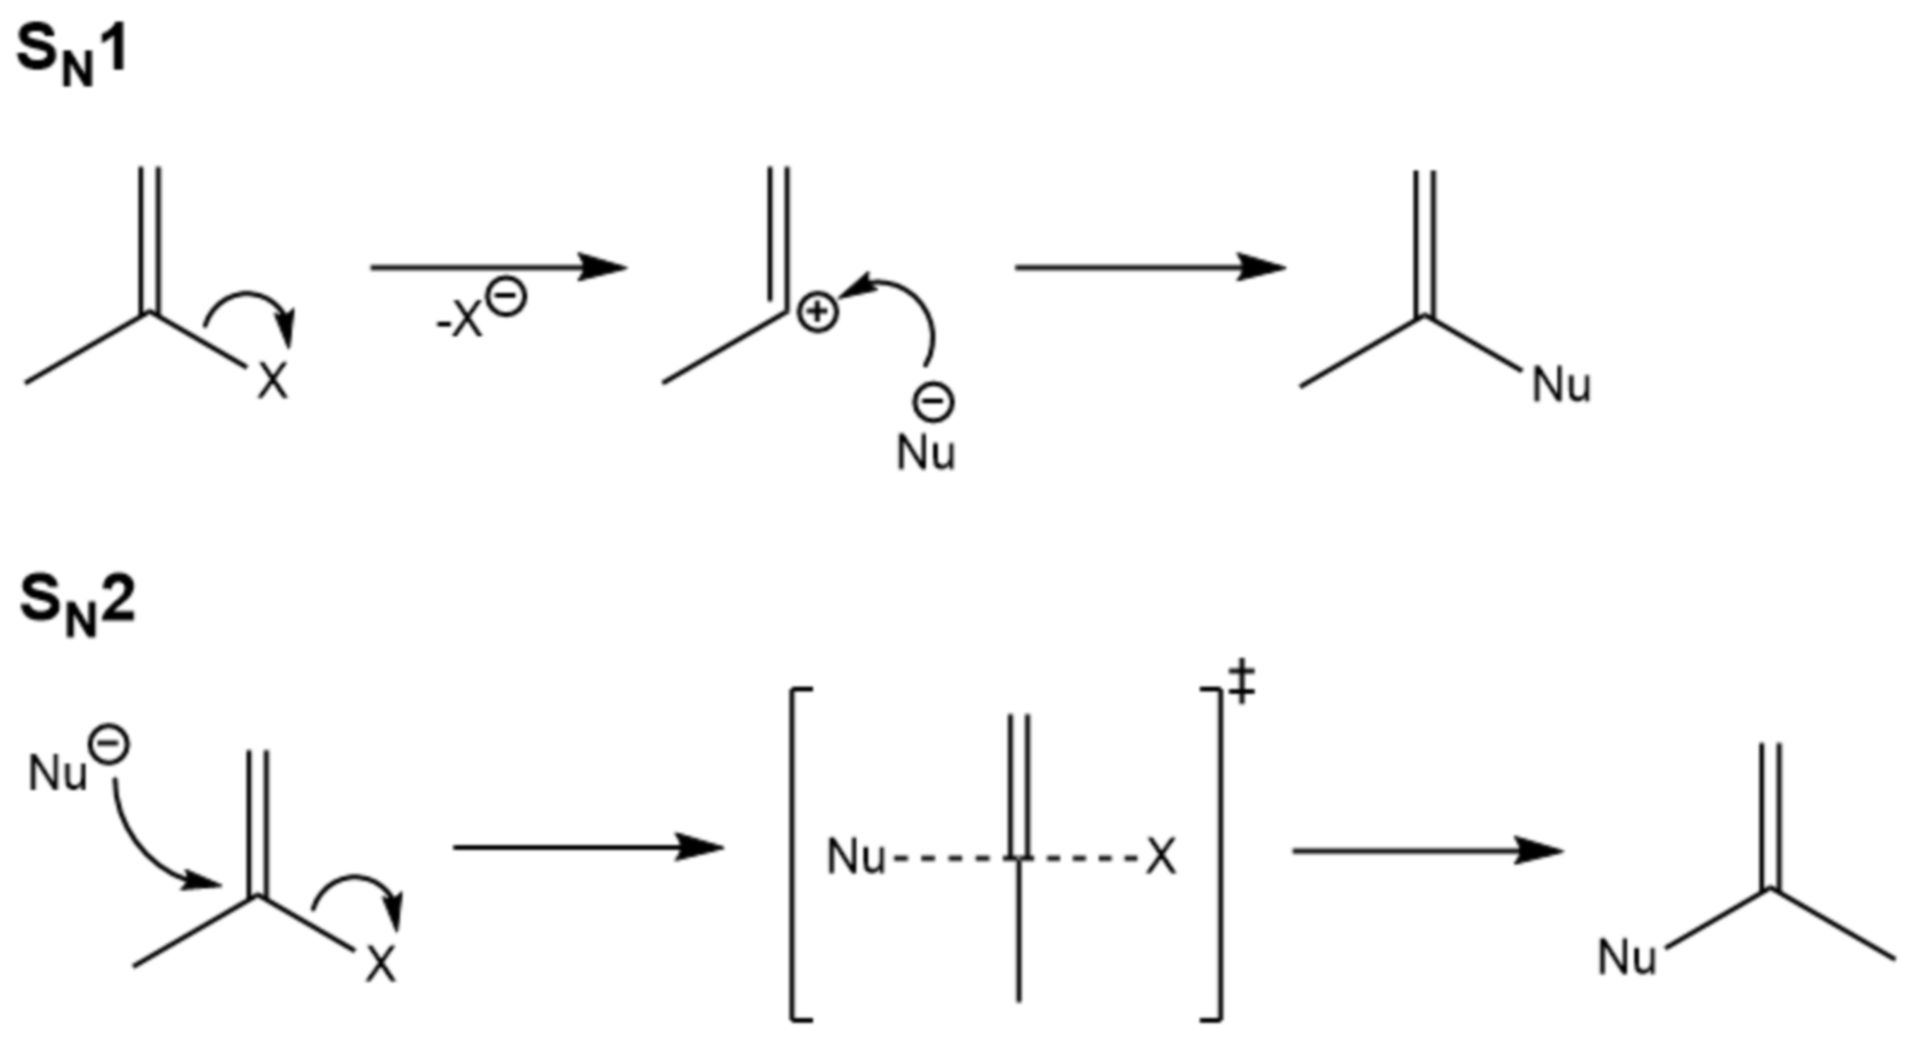 Nucleophile Substitution